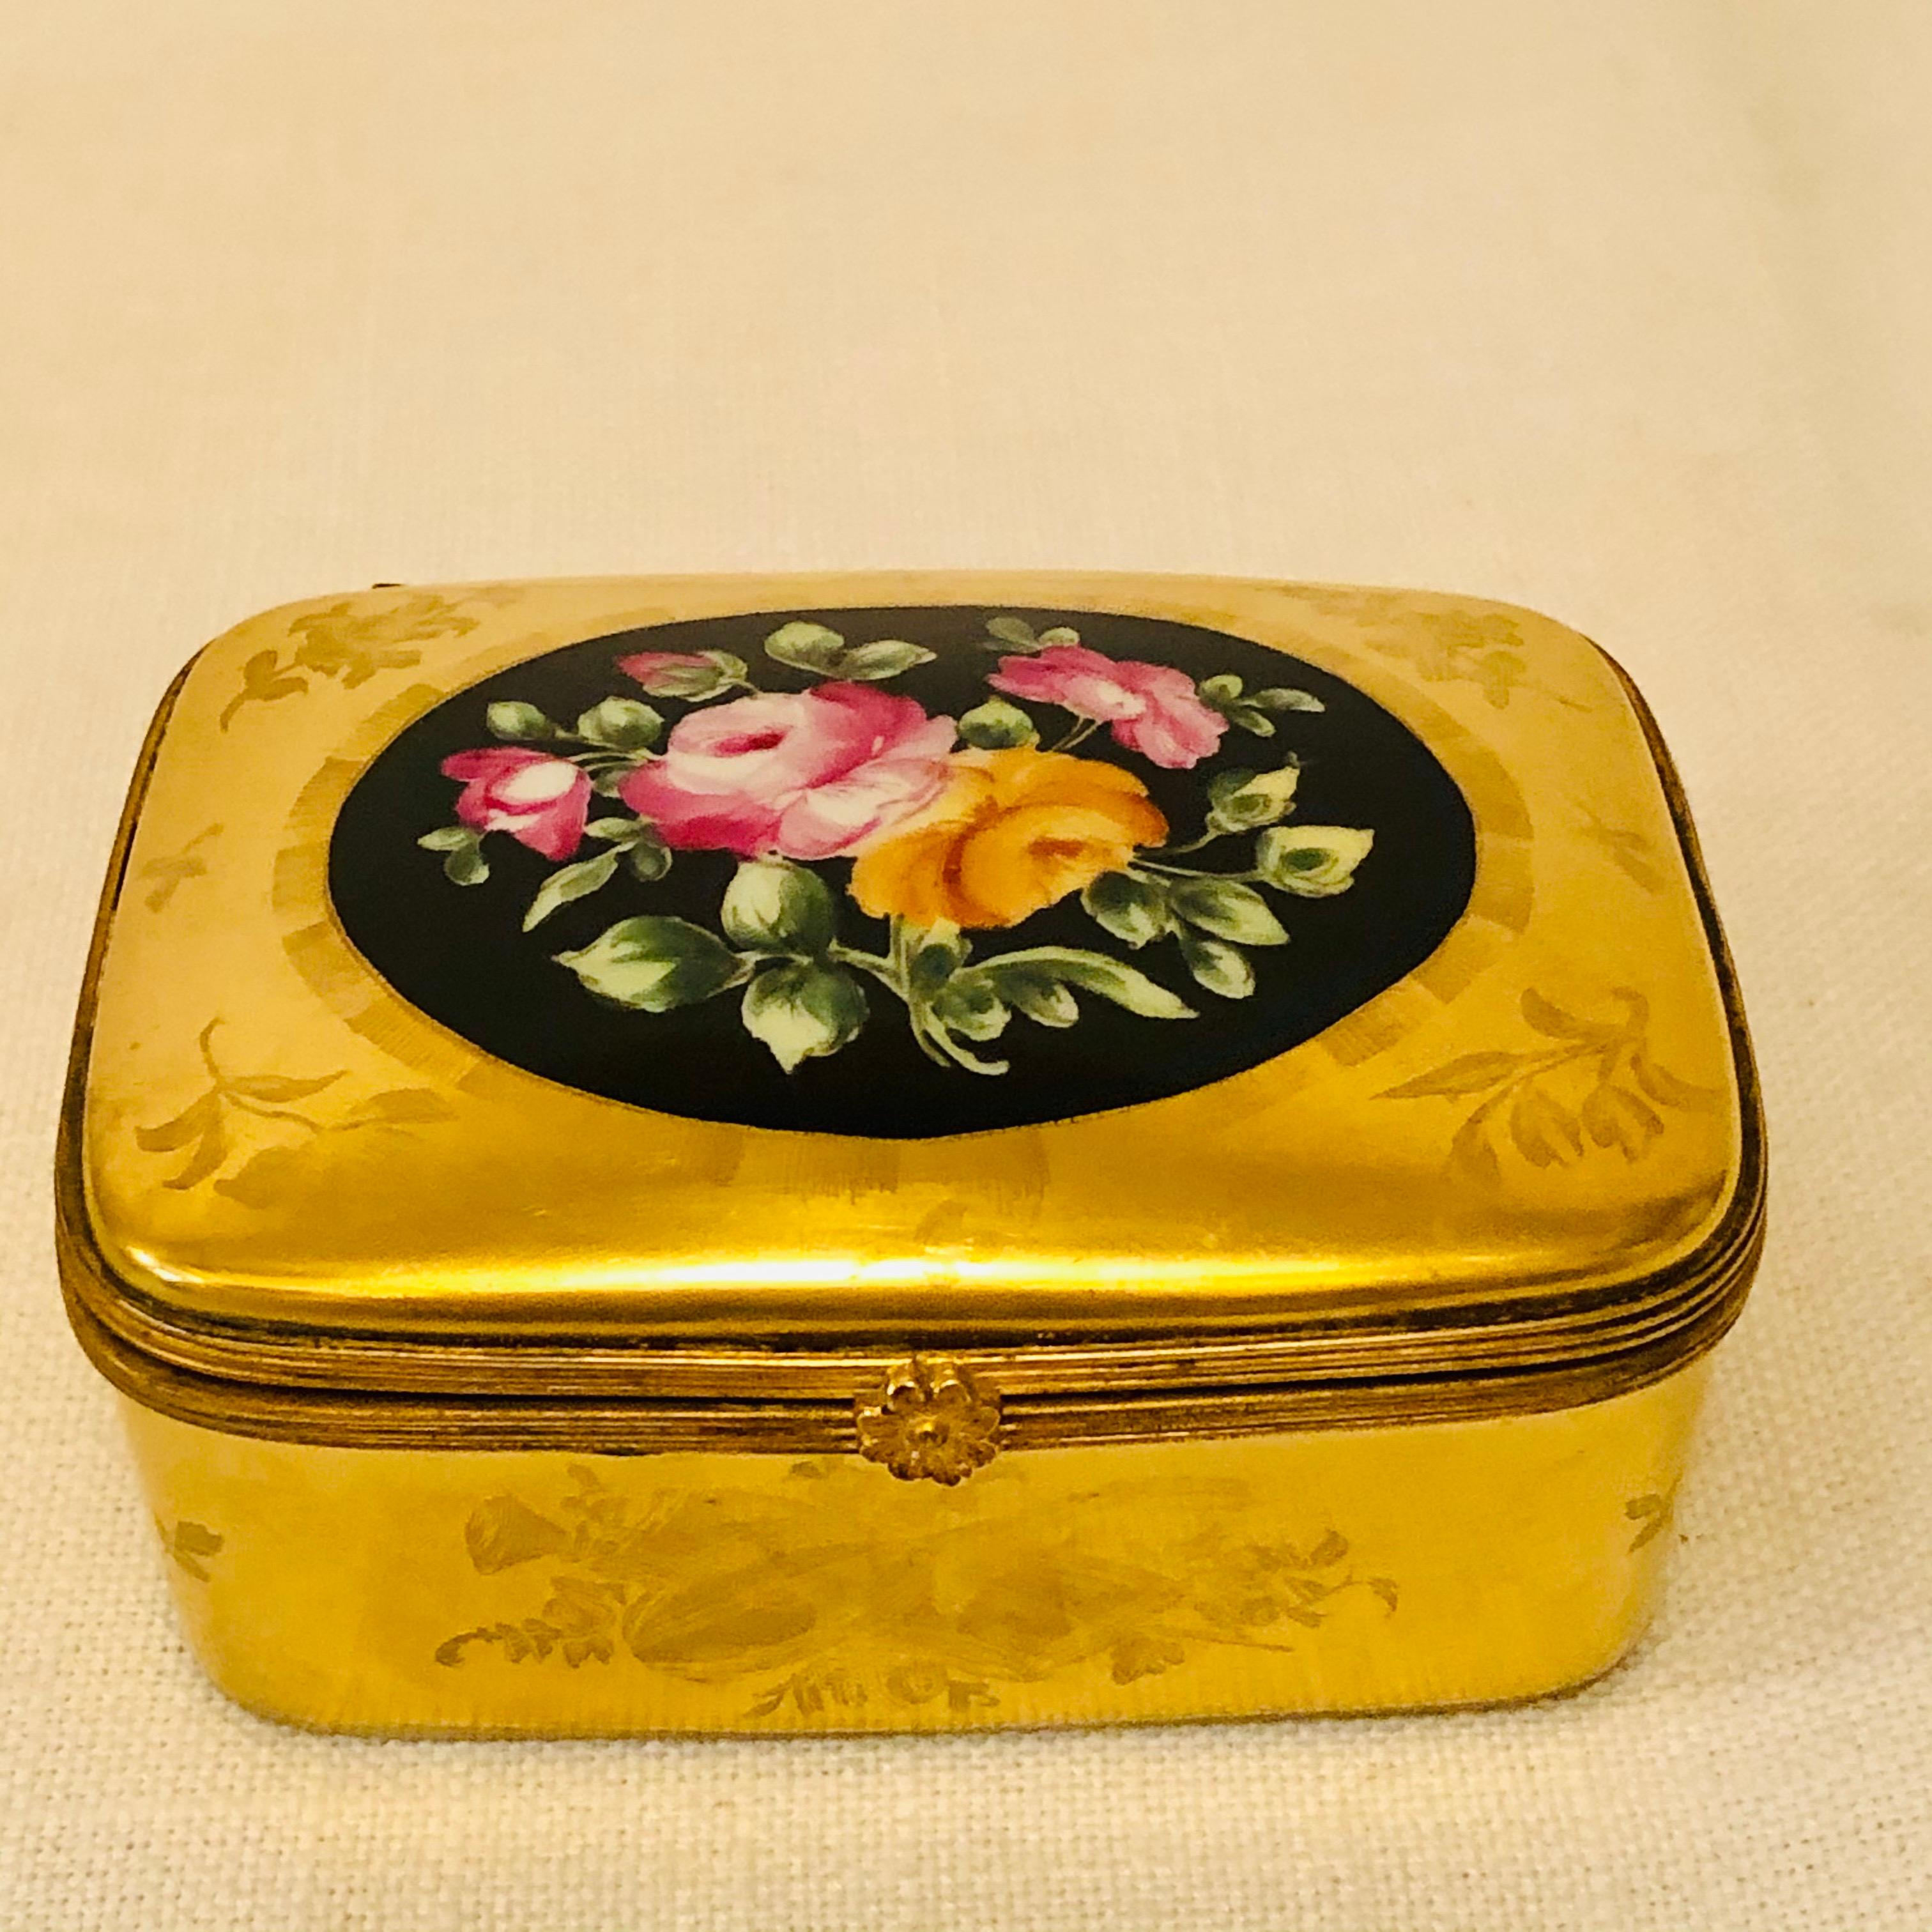 Le Tallec Box with a Gold BackGround and a Central Painting of a Flower Bouquet 11